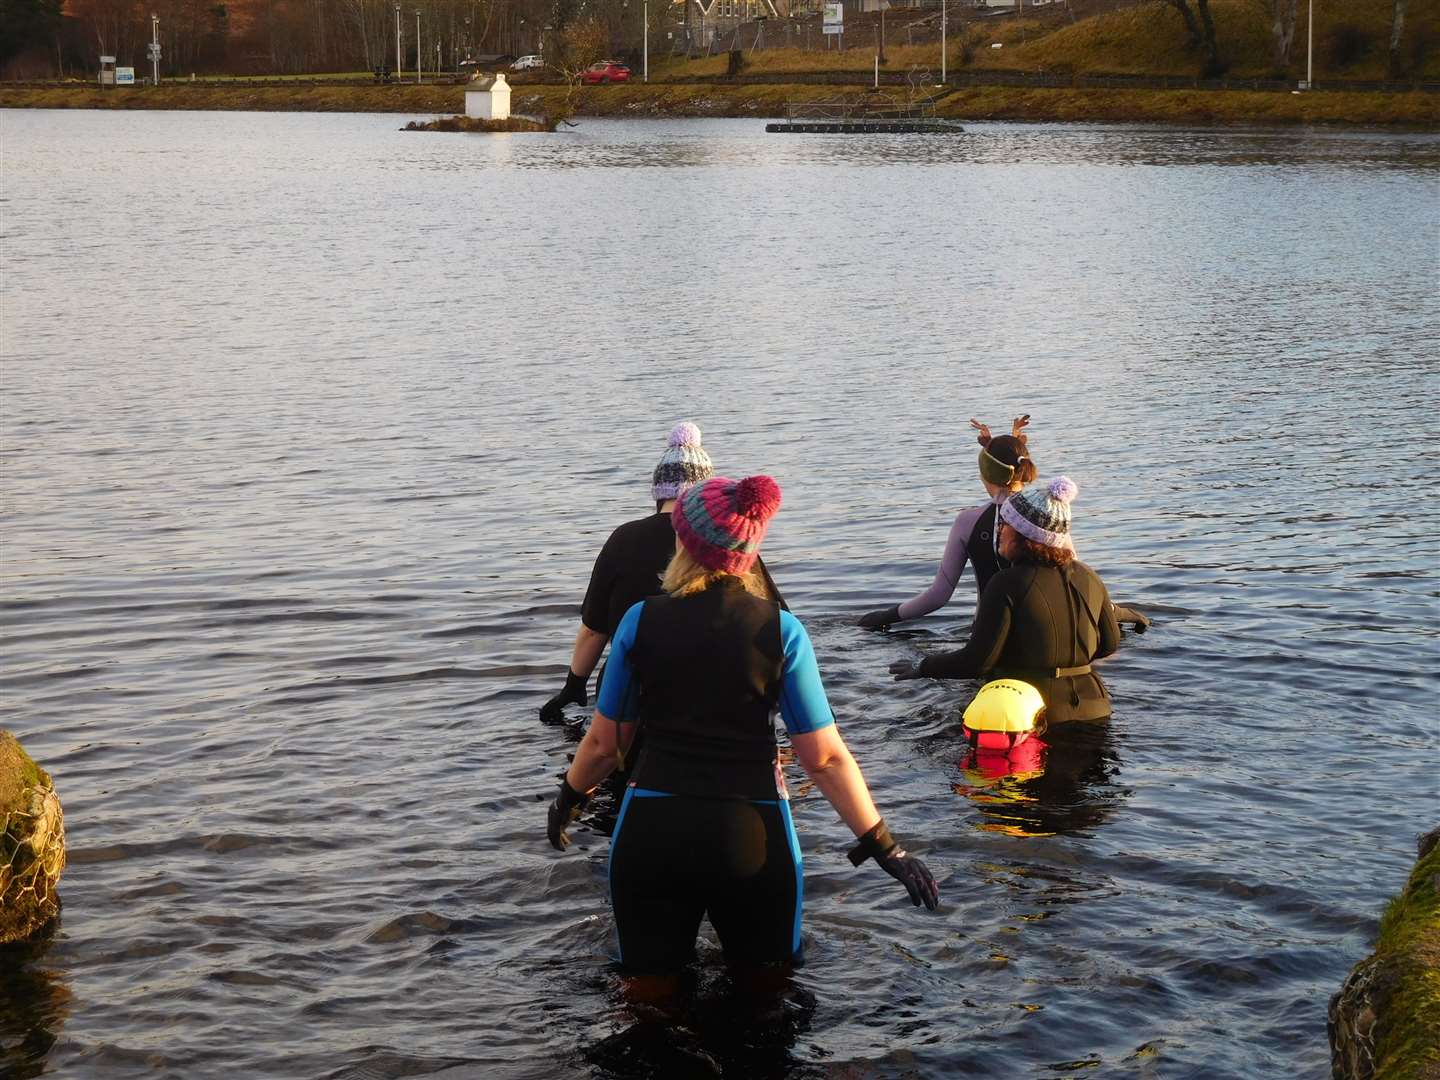 The brave swimmers enter the cold waters of Loch Shin.